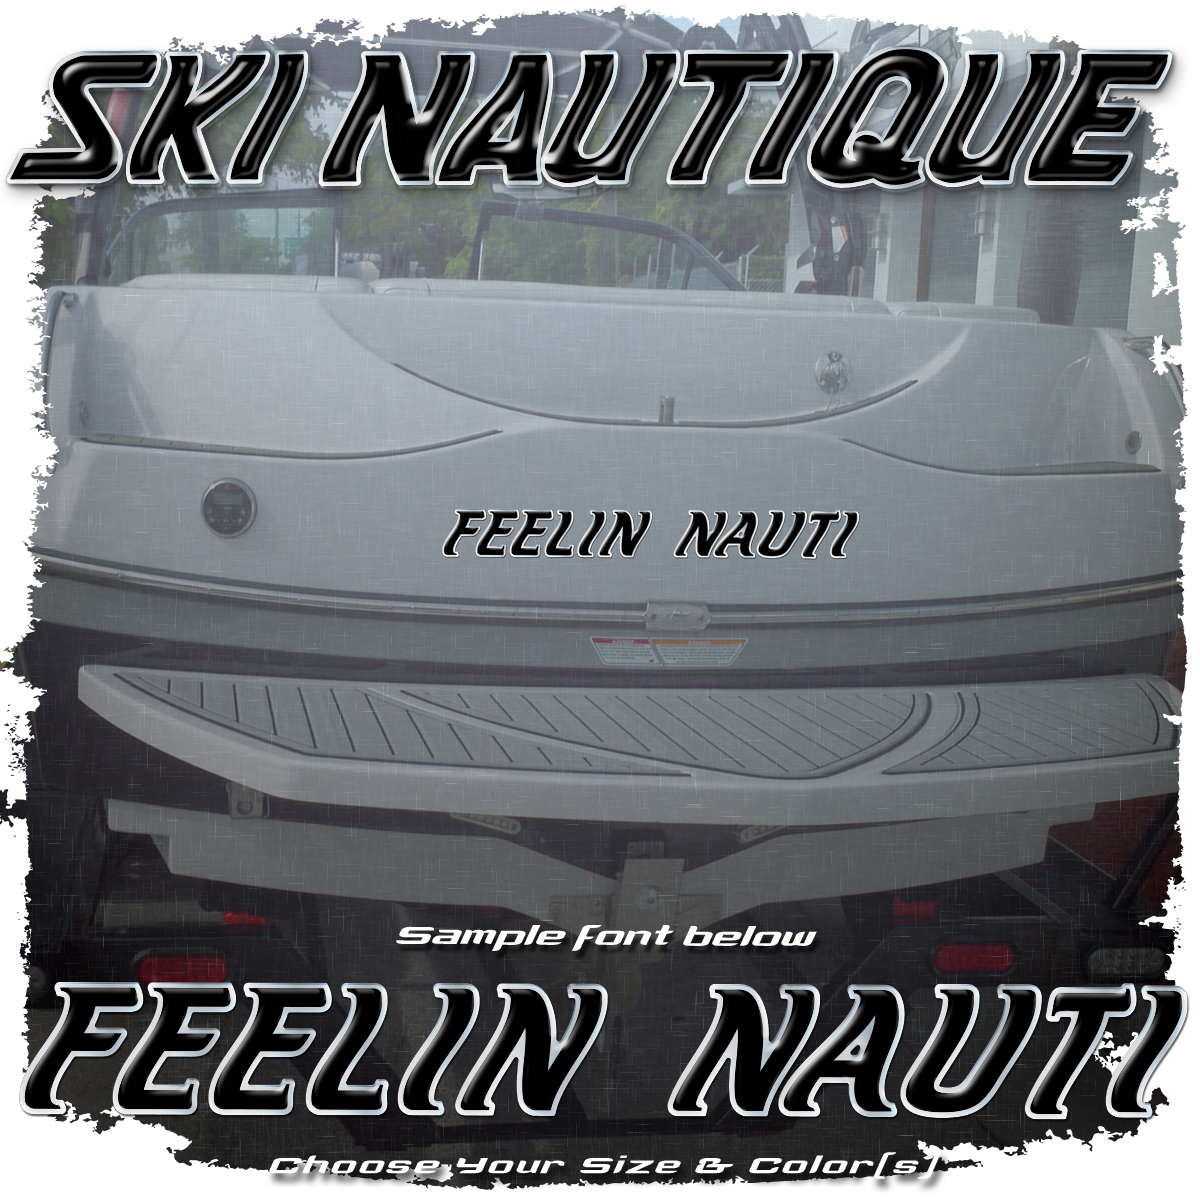 Domed Boat Name in the 1980-01 Ski Nautique Font, Choose Your Own Size & Colors